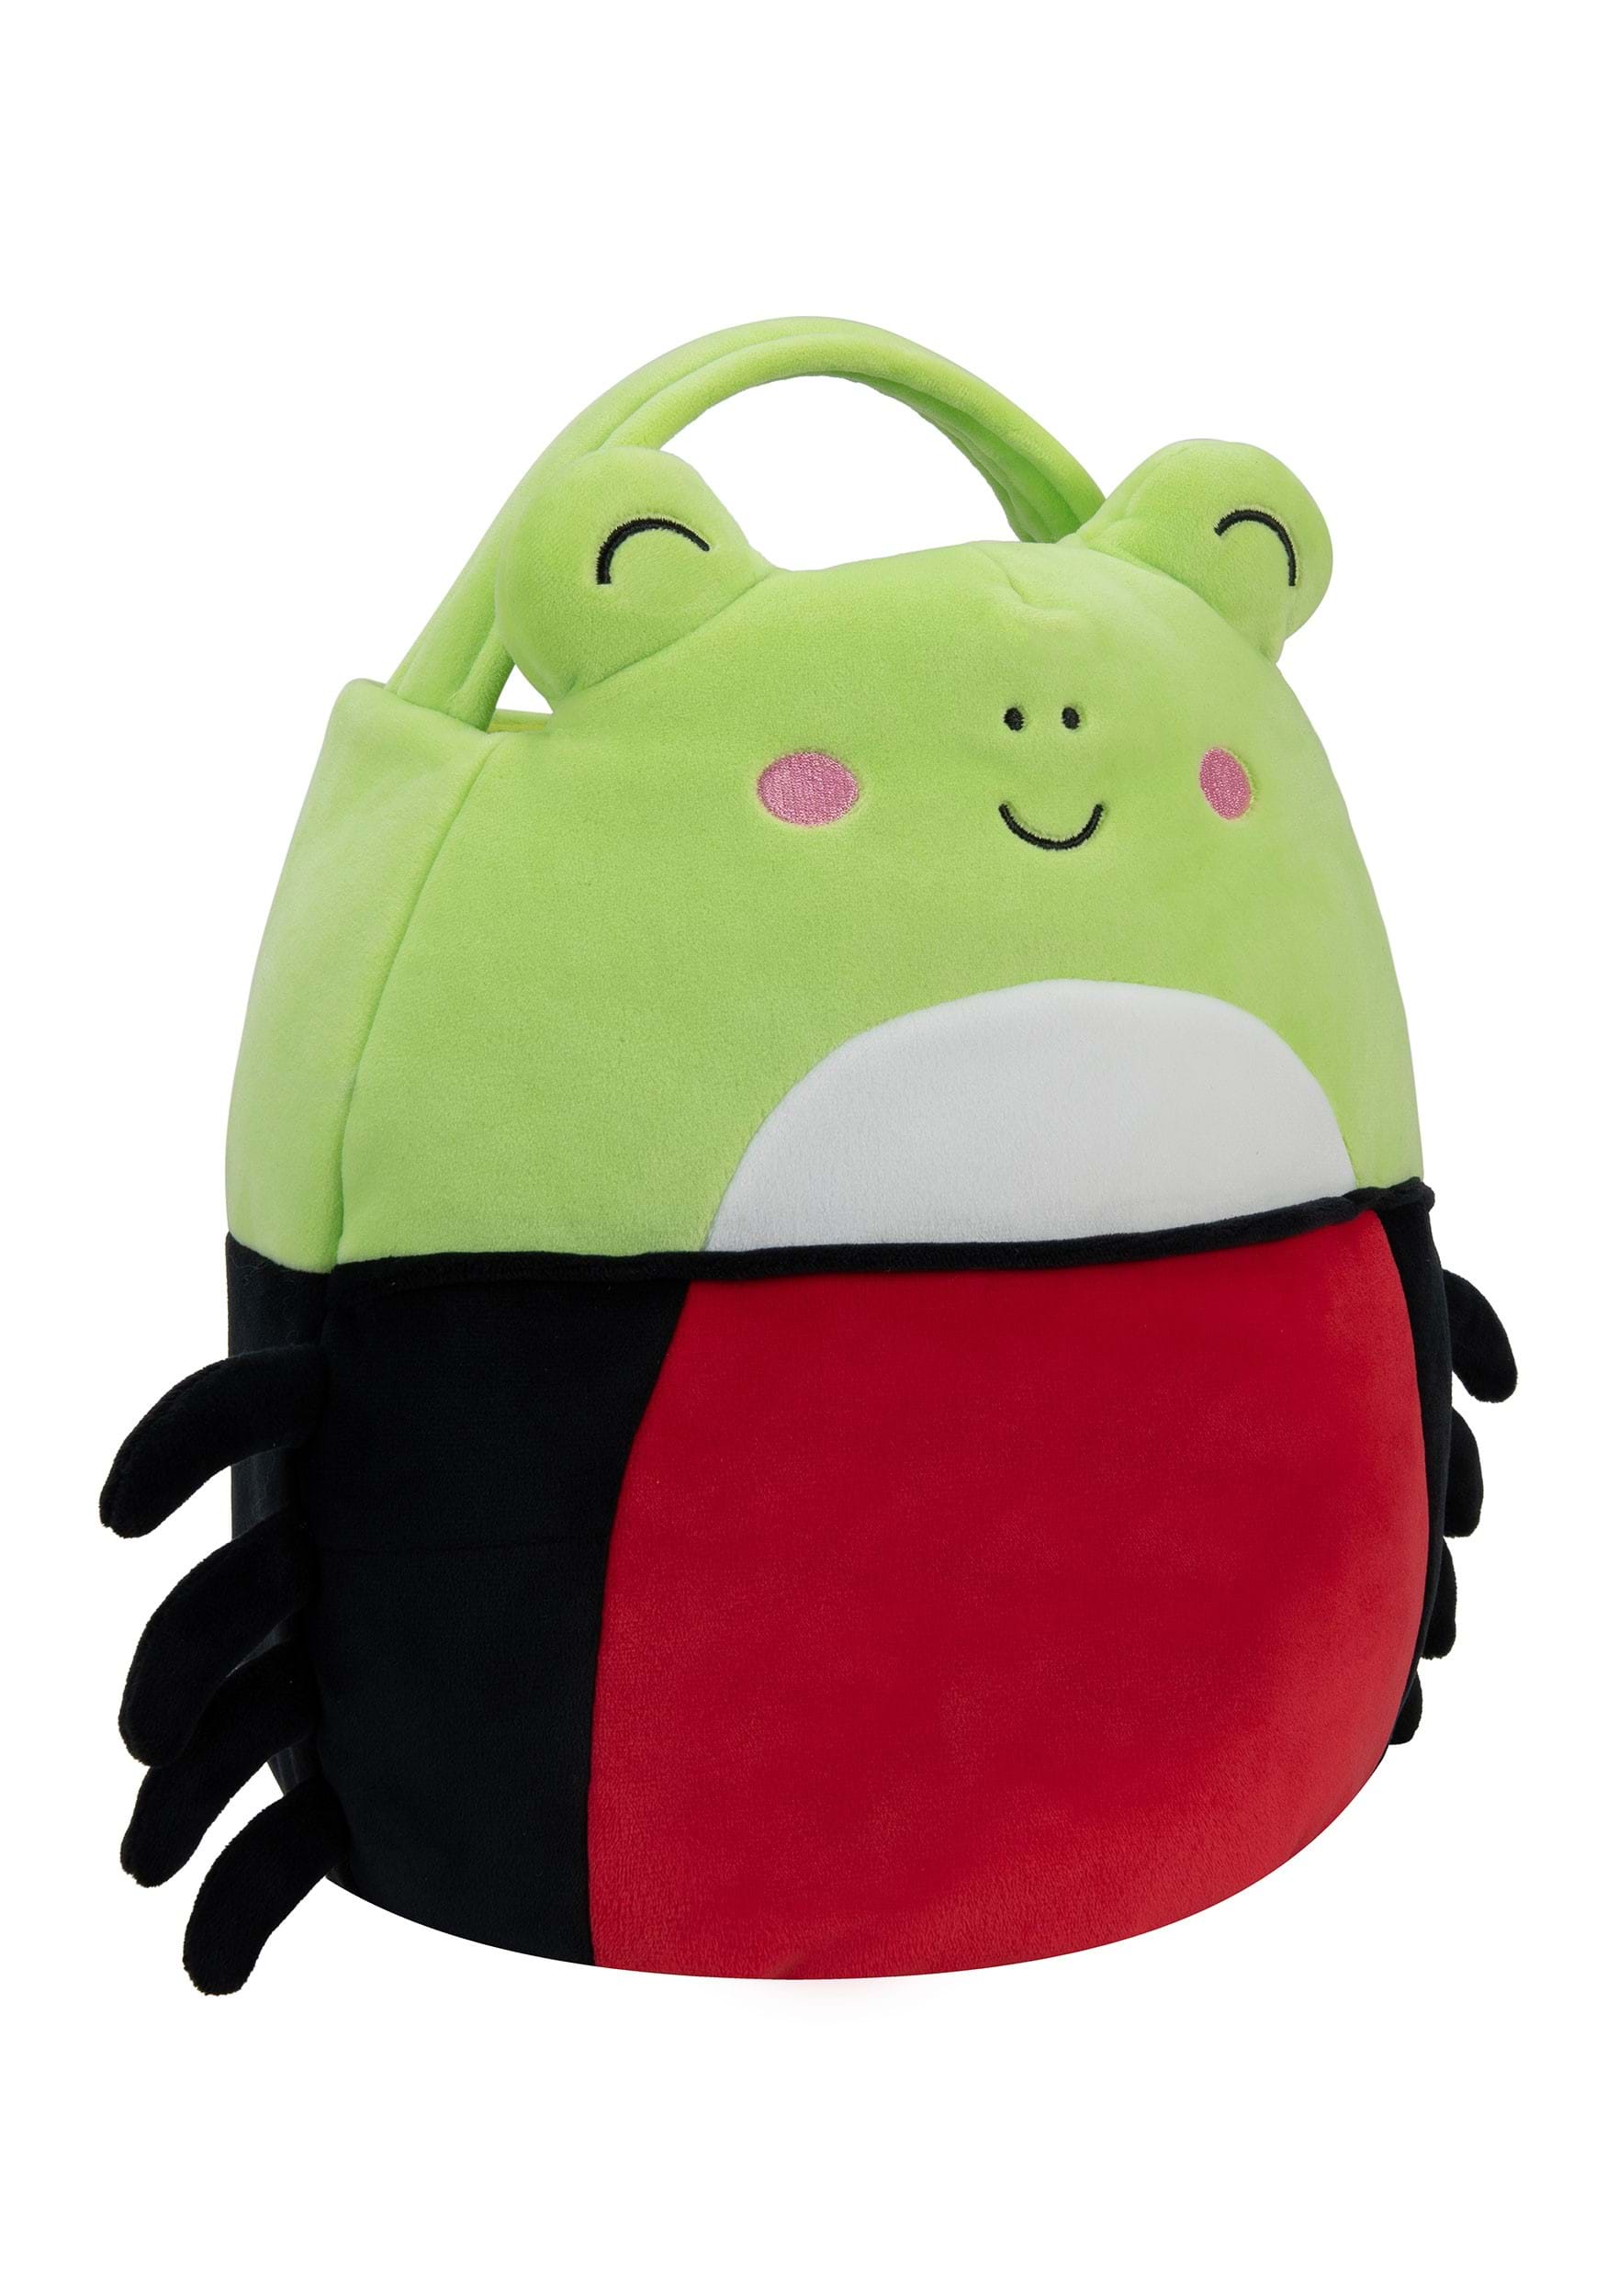 Wendy The Frog Squishmallow